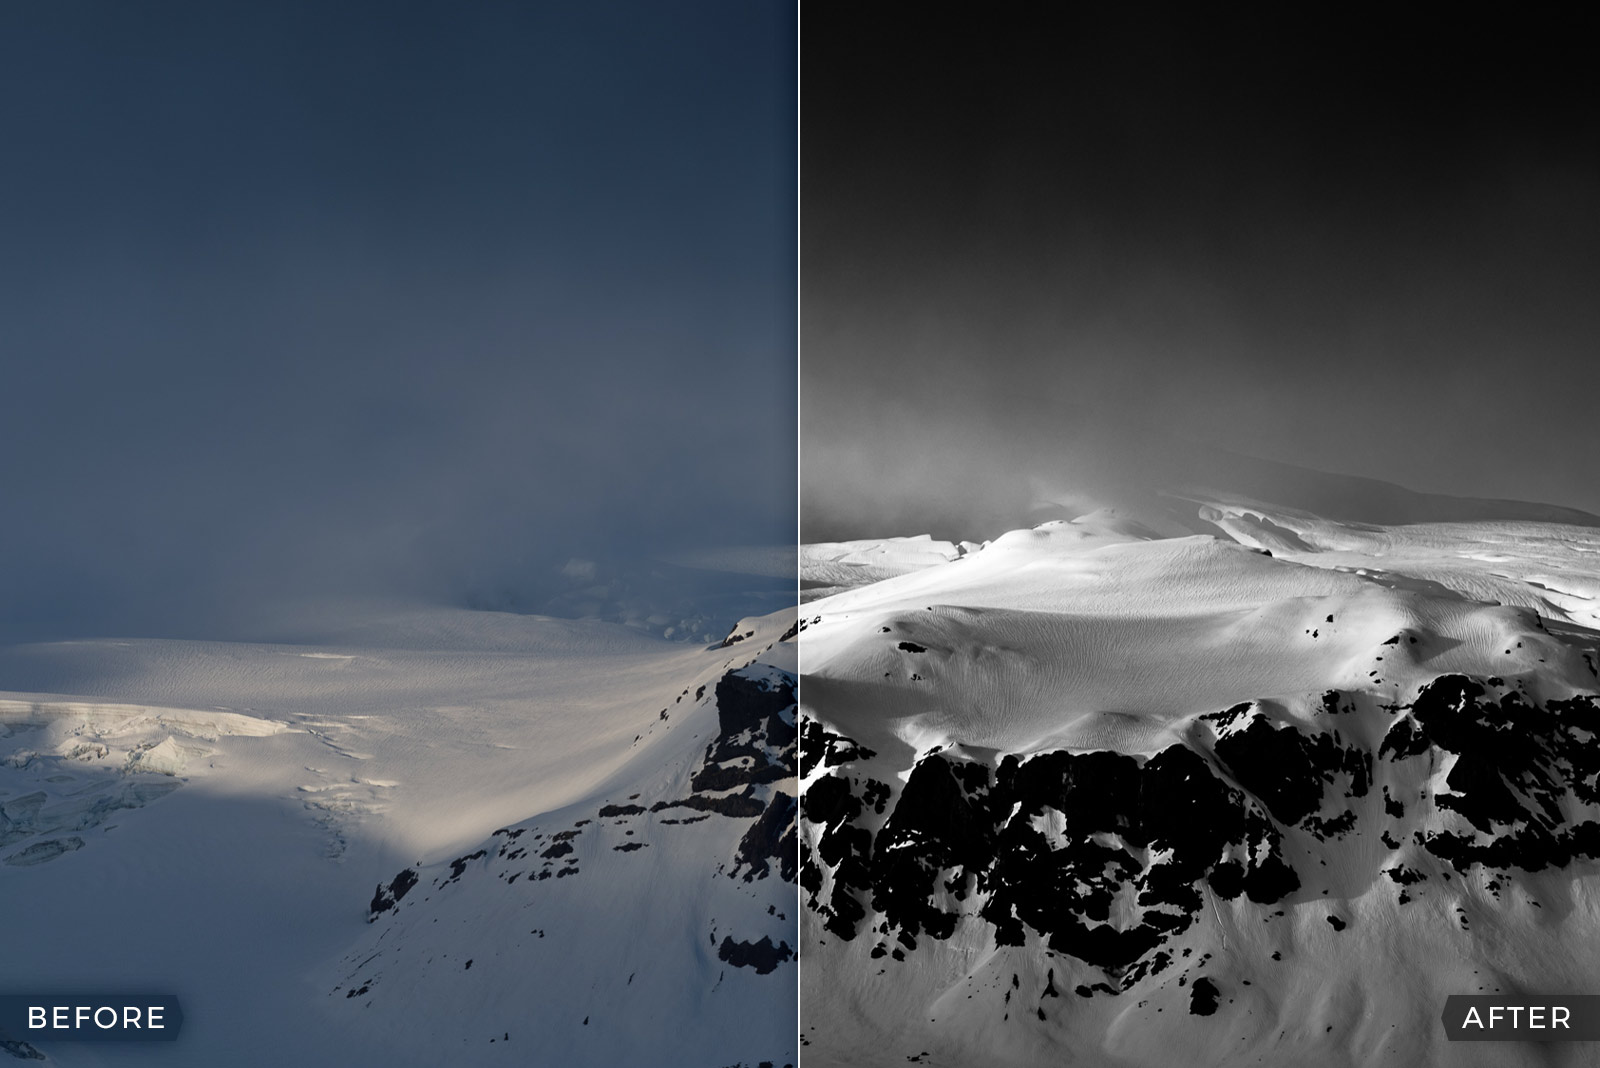 FREE Lightroom Presets for Black & White Mountain Photography